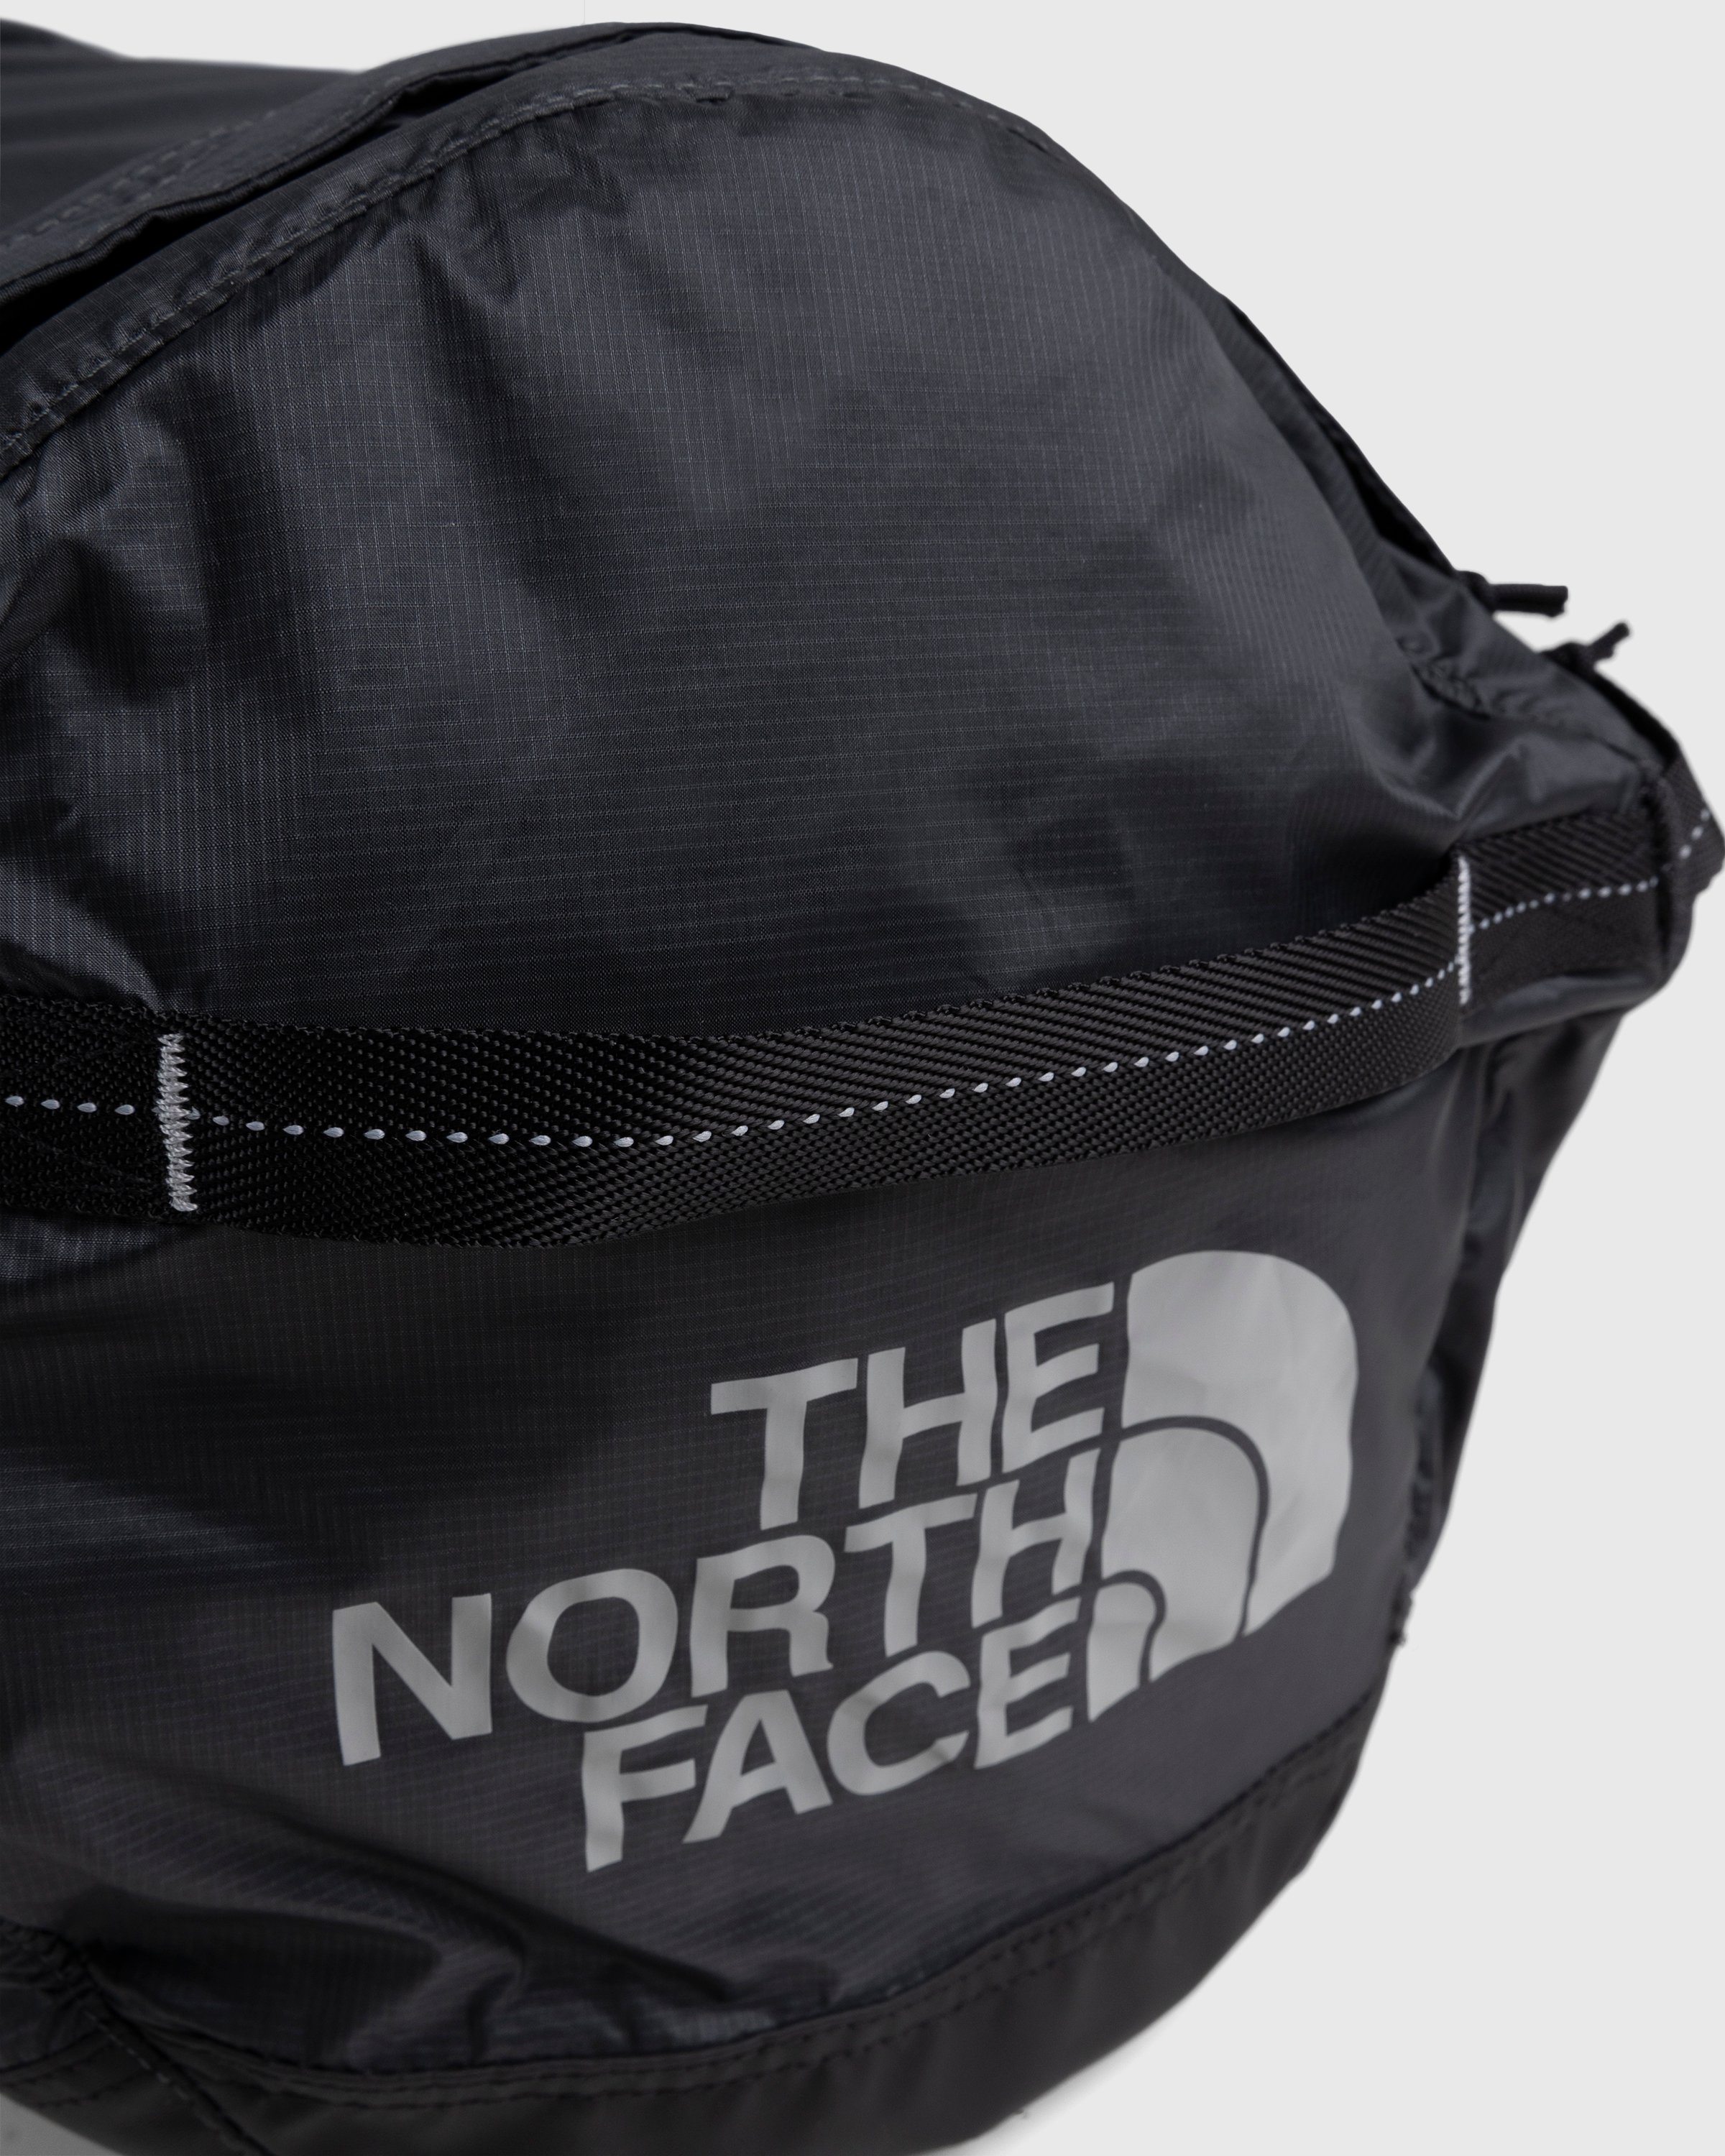 The North Face - Flyweight Duffel Grey/Black - Accessories - Grey - Image 6